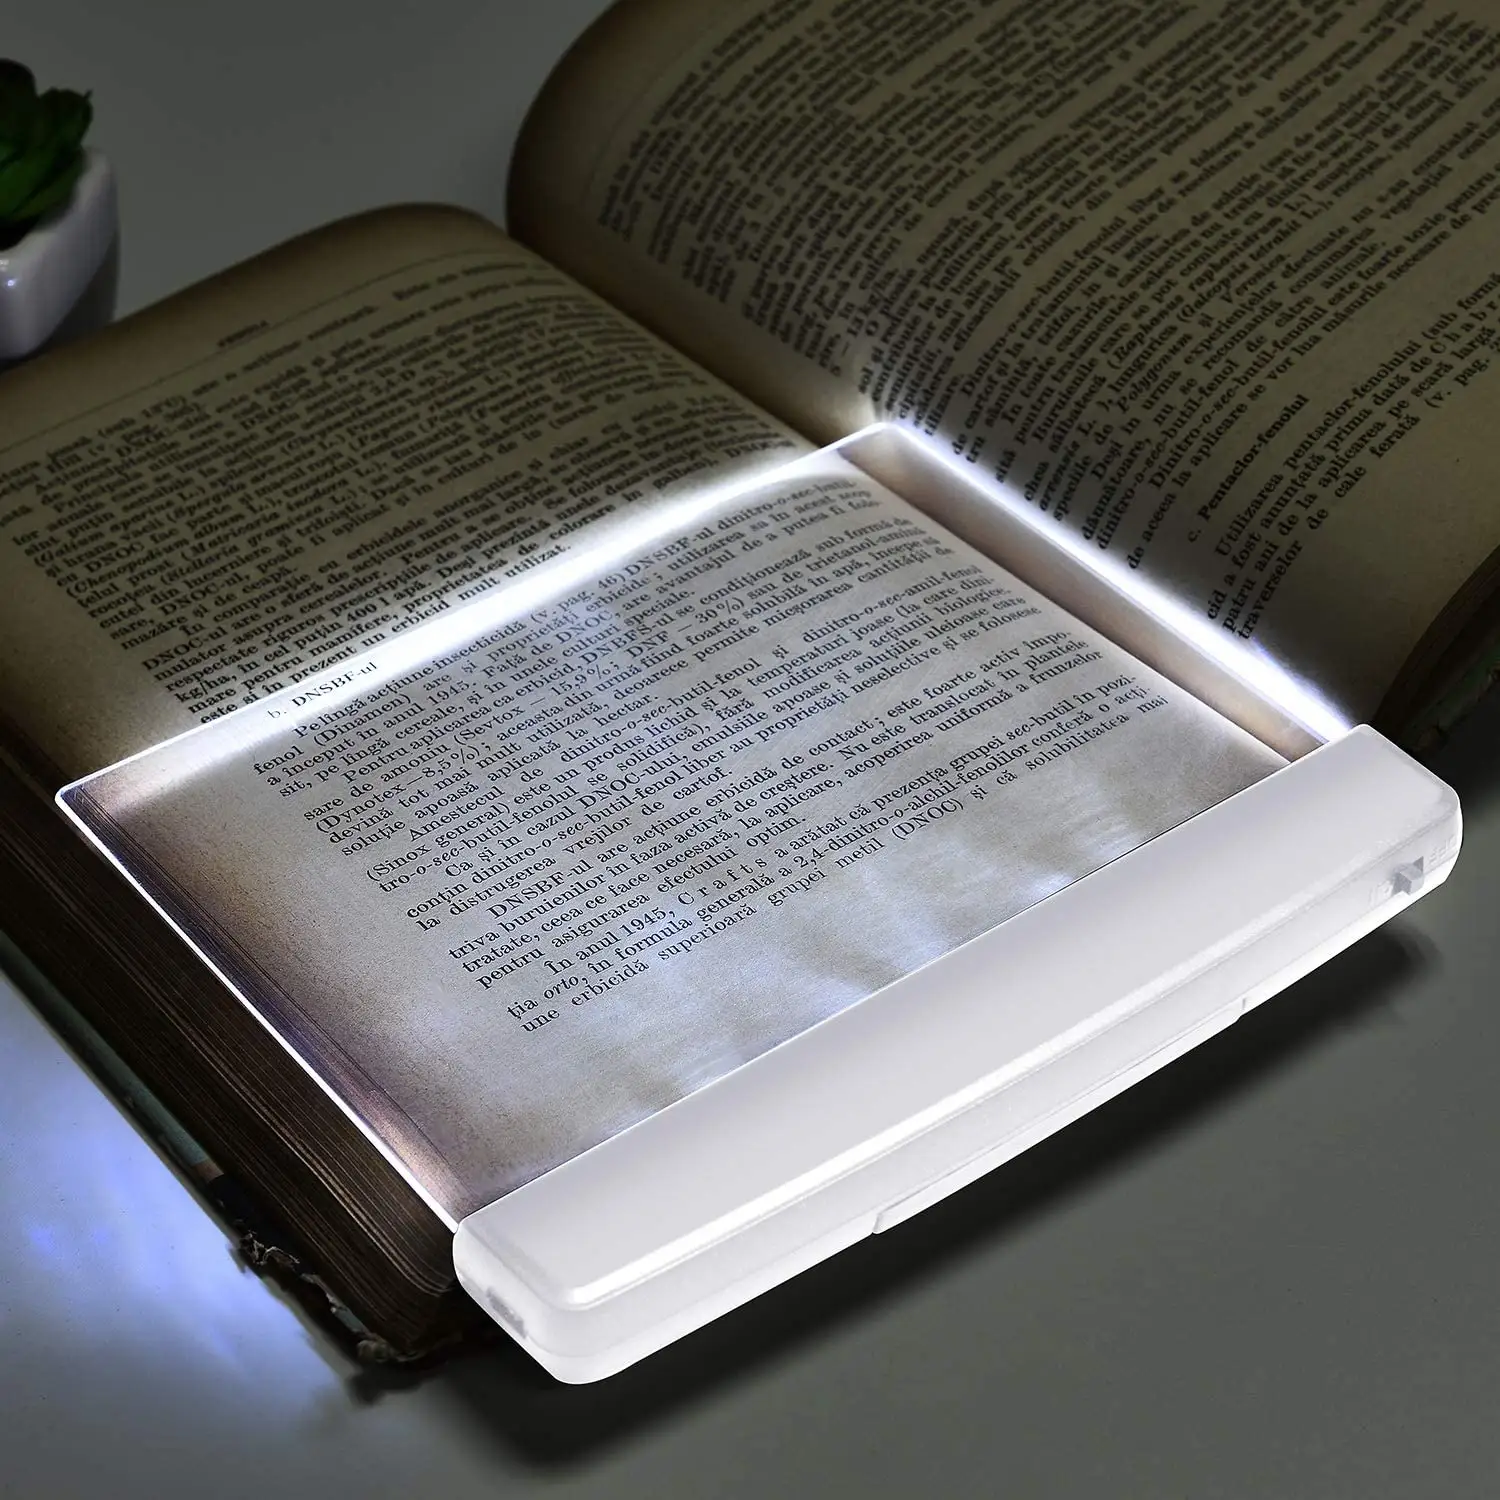 Wholesale Battery Operated Lumino Reading Lighting Portable Flat Book Light Page Book Light Bedroom Small Foldable 90 ABS Black